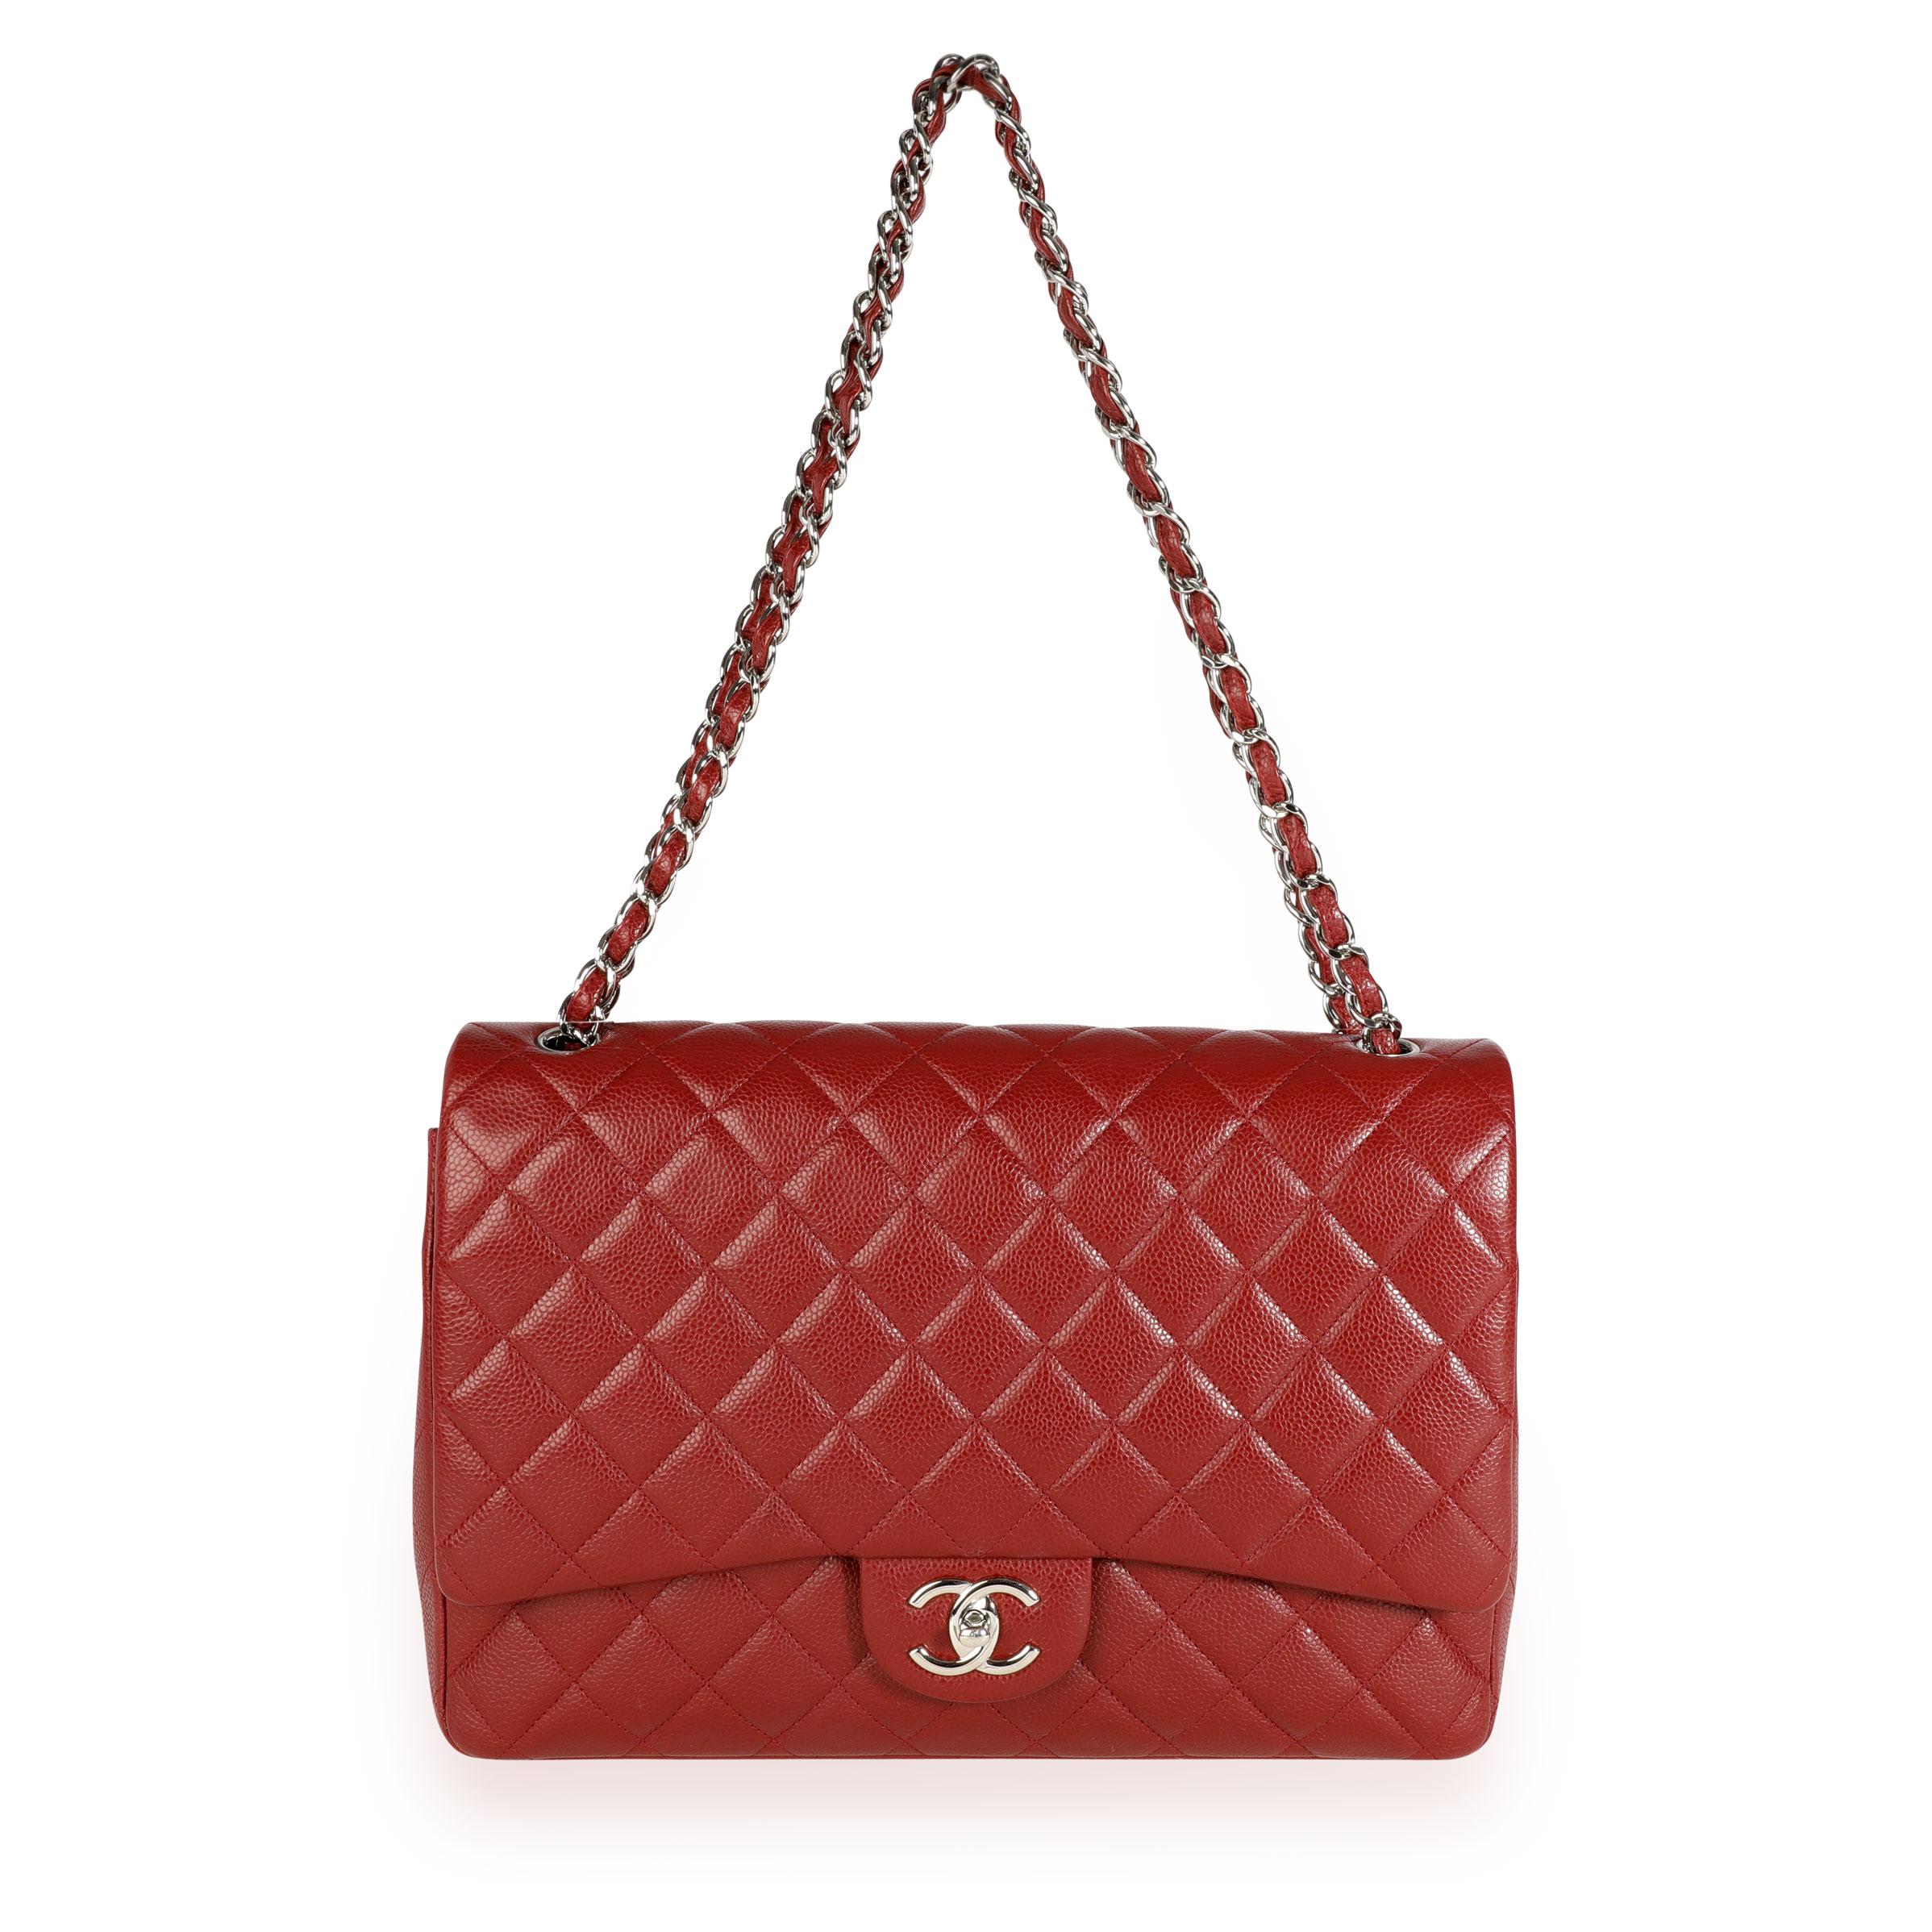 Chanel Burgundy Quilted Caviar Maxi Classic Double Flap Bag
SKU: 110782

MSRP: USD 7,700.00
Handbag Condition: Very Good
Condition Comments: Very Good Condition. Scuffing to front left corner. Light marks to interior. Scratching to hardware.
Brand: